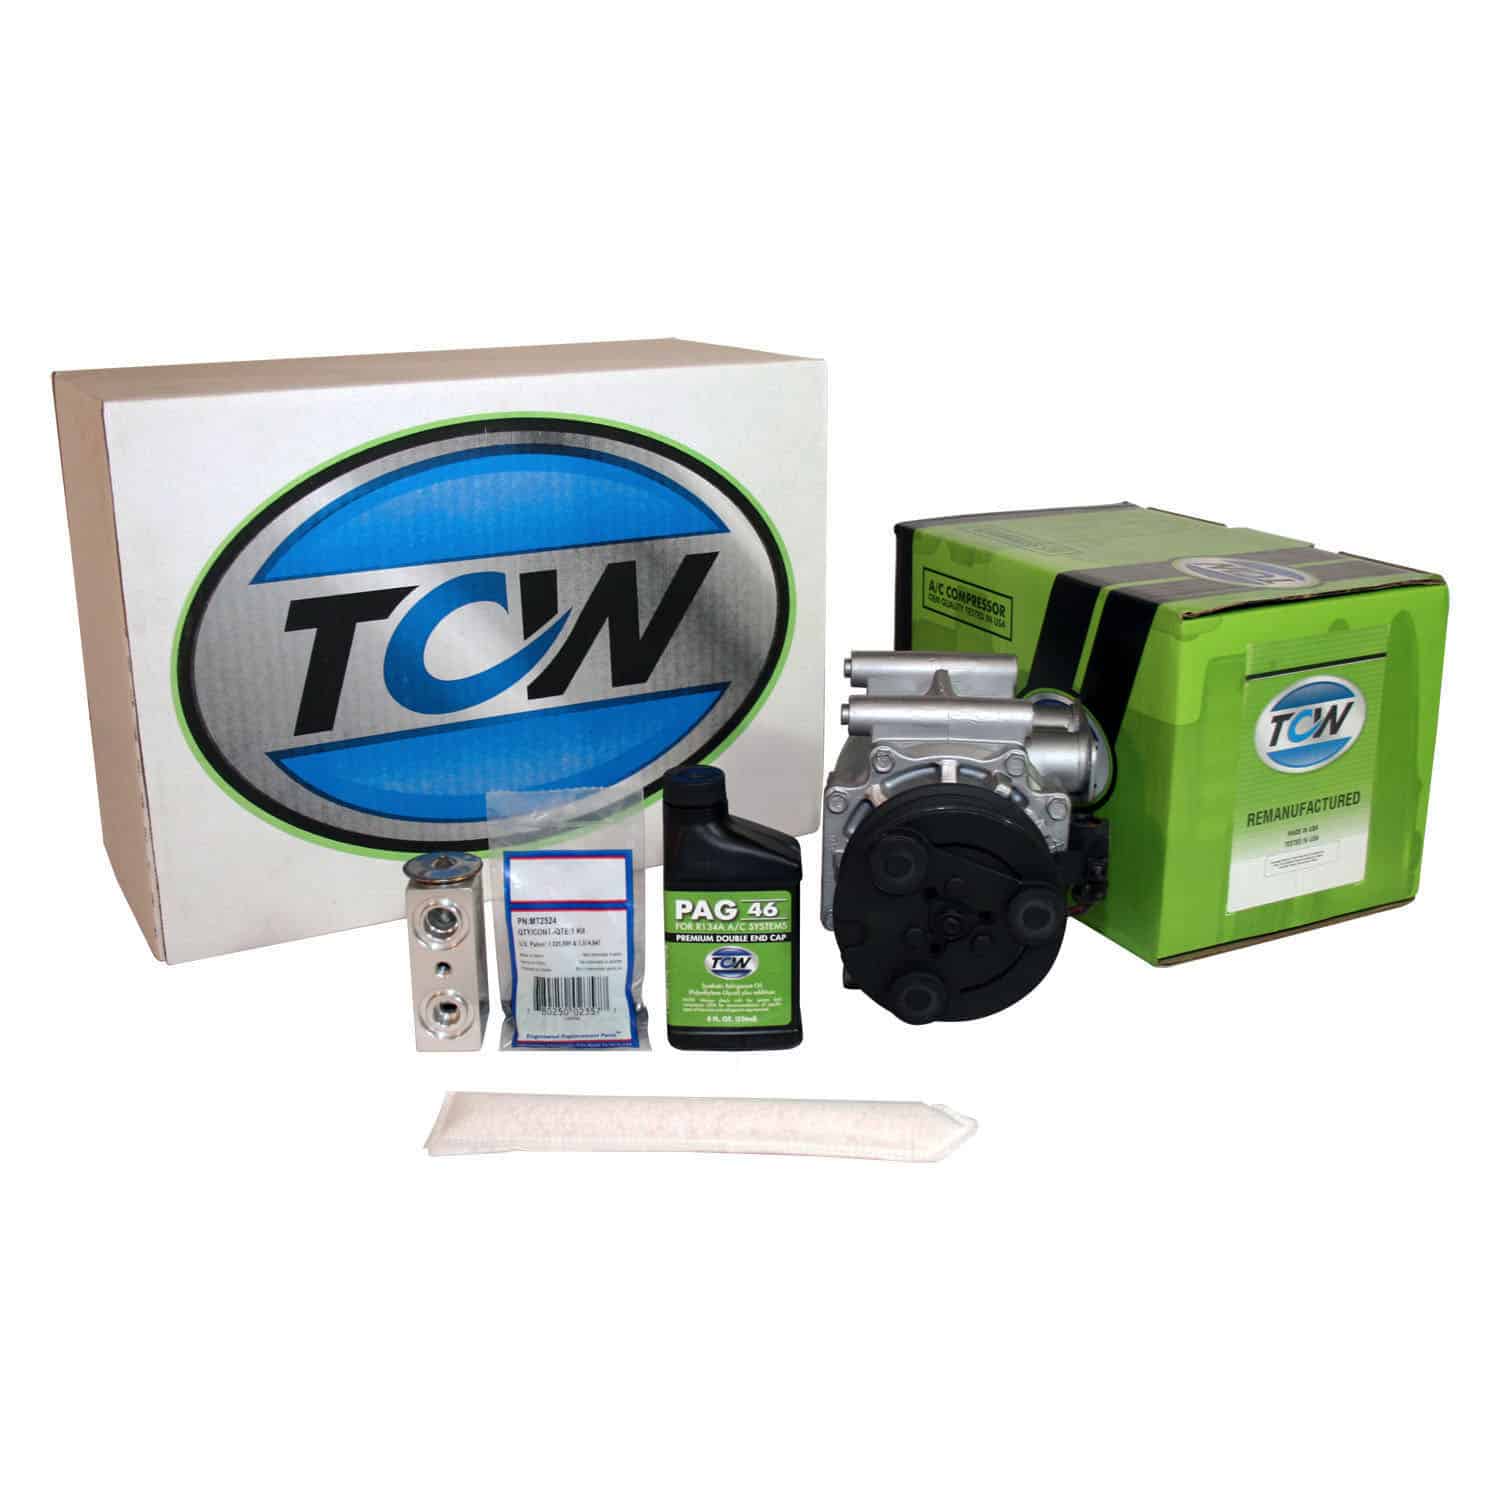 TCW Vehicle A/C Kit K1000251R Remanufactured Product Image field_60b6a13a6e67c